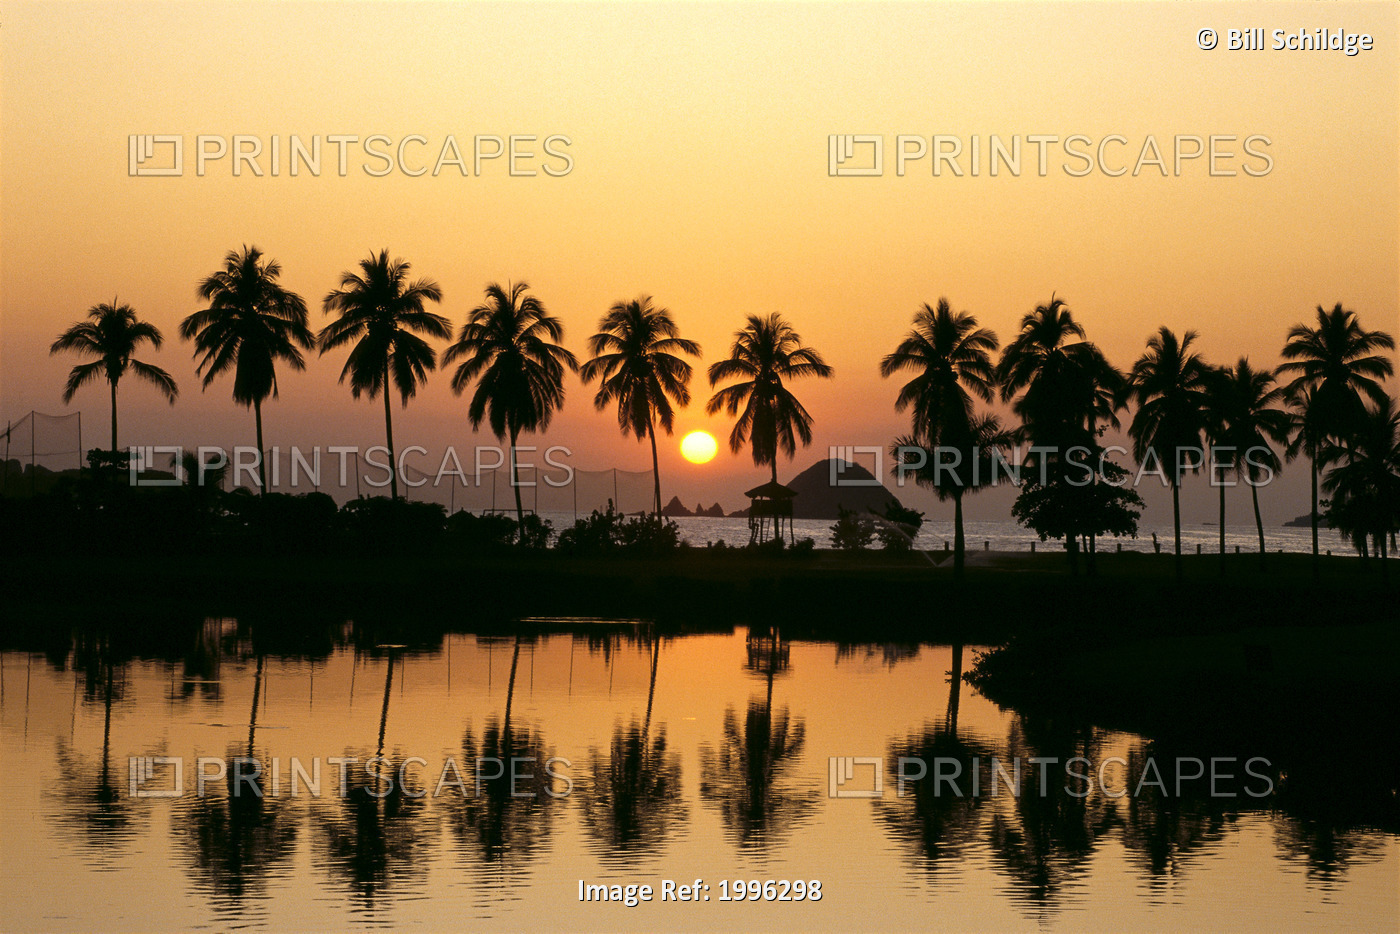 Mexico, Ixtapa, Sunset With Palms, Reflections On Water Foreground A53F